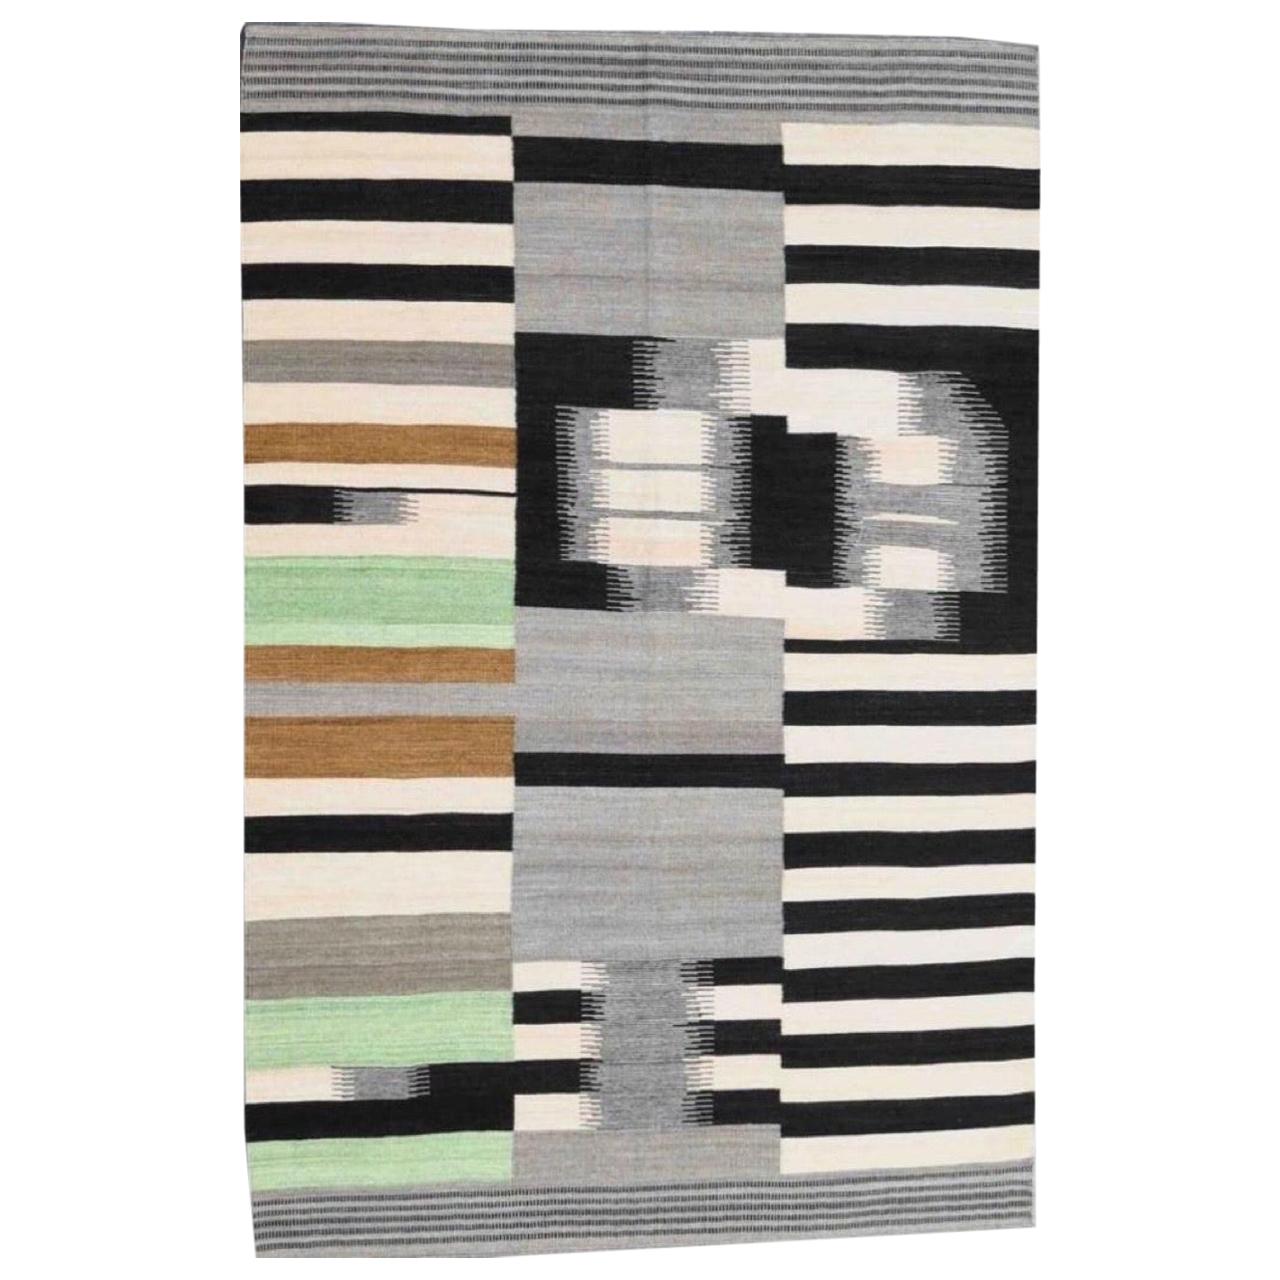 Beautiful New Modern Design Handwoven Kilim Rug  size 6ft 6in x 9ft 10in For Sale